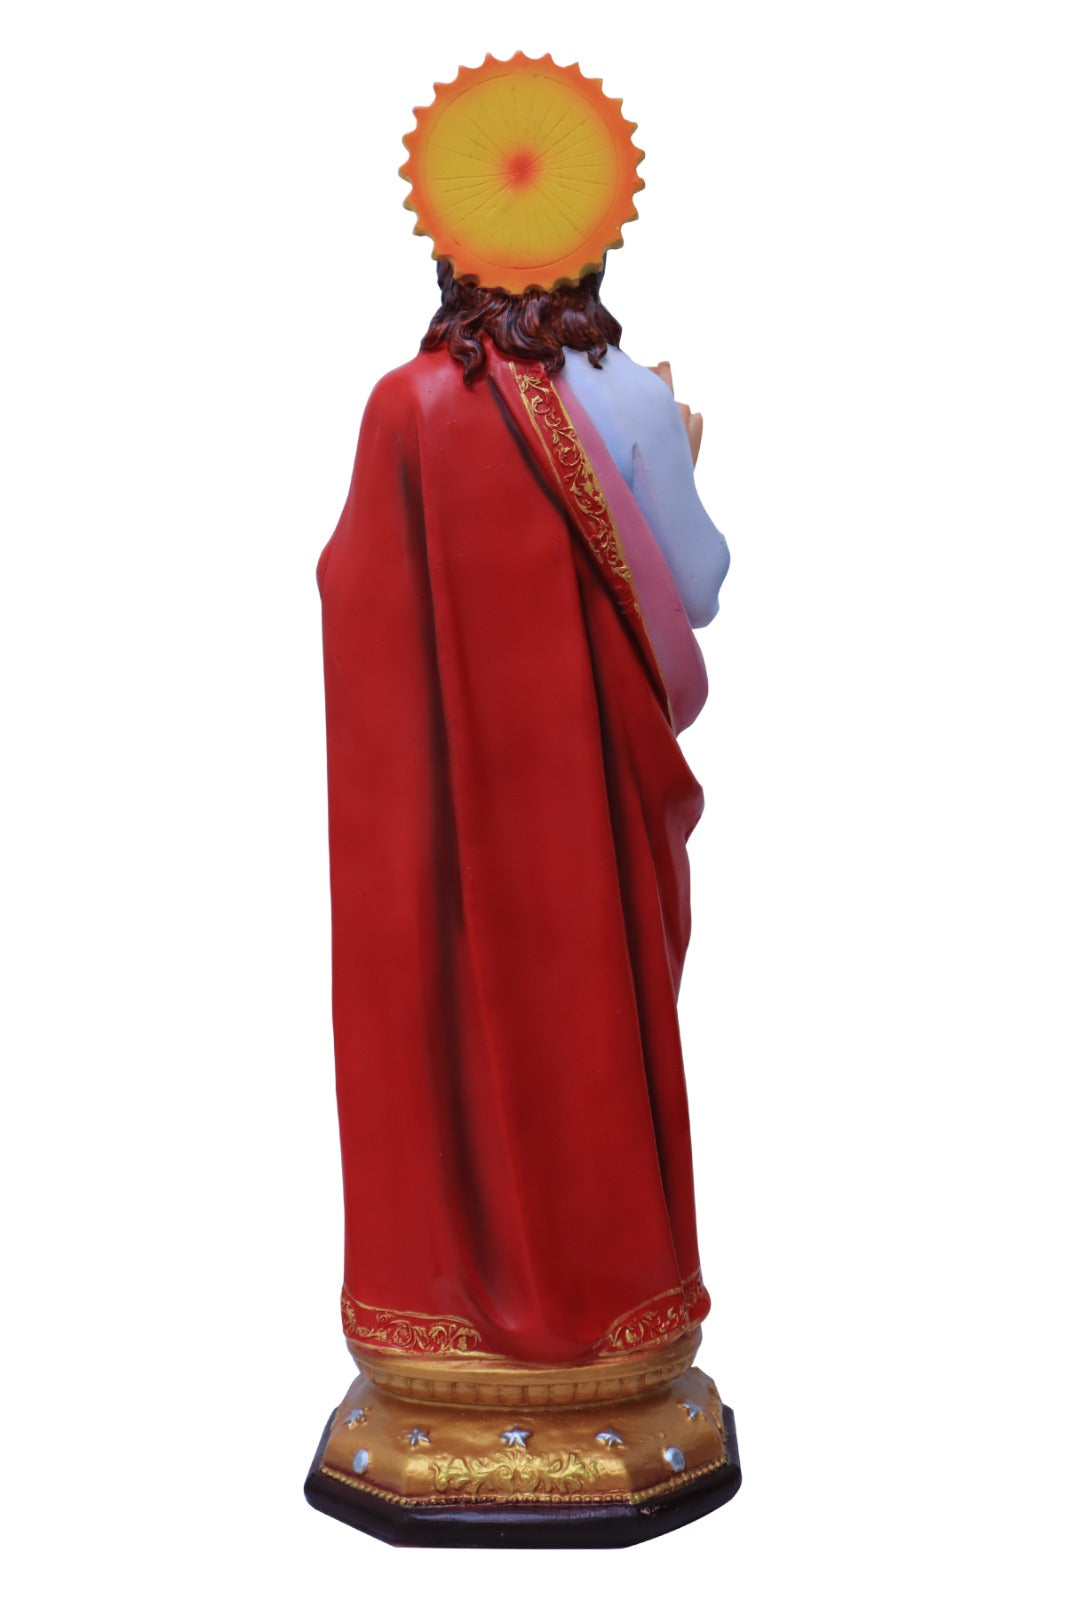 Sacred Heart Statue - 22 Inch | Living Words